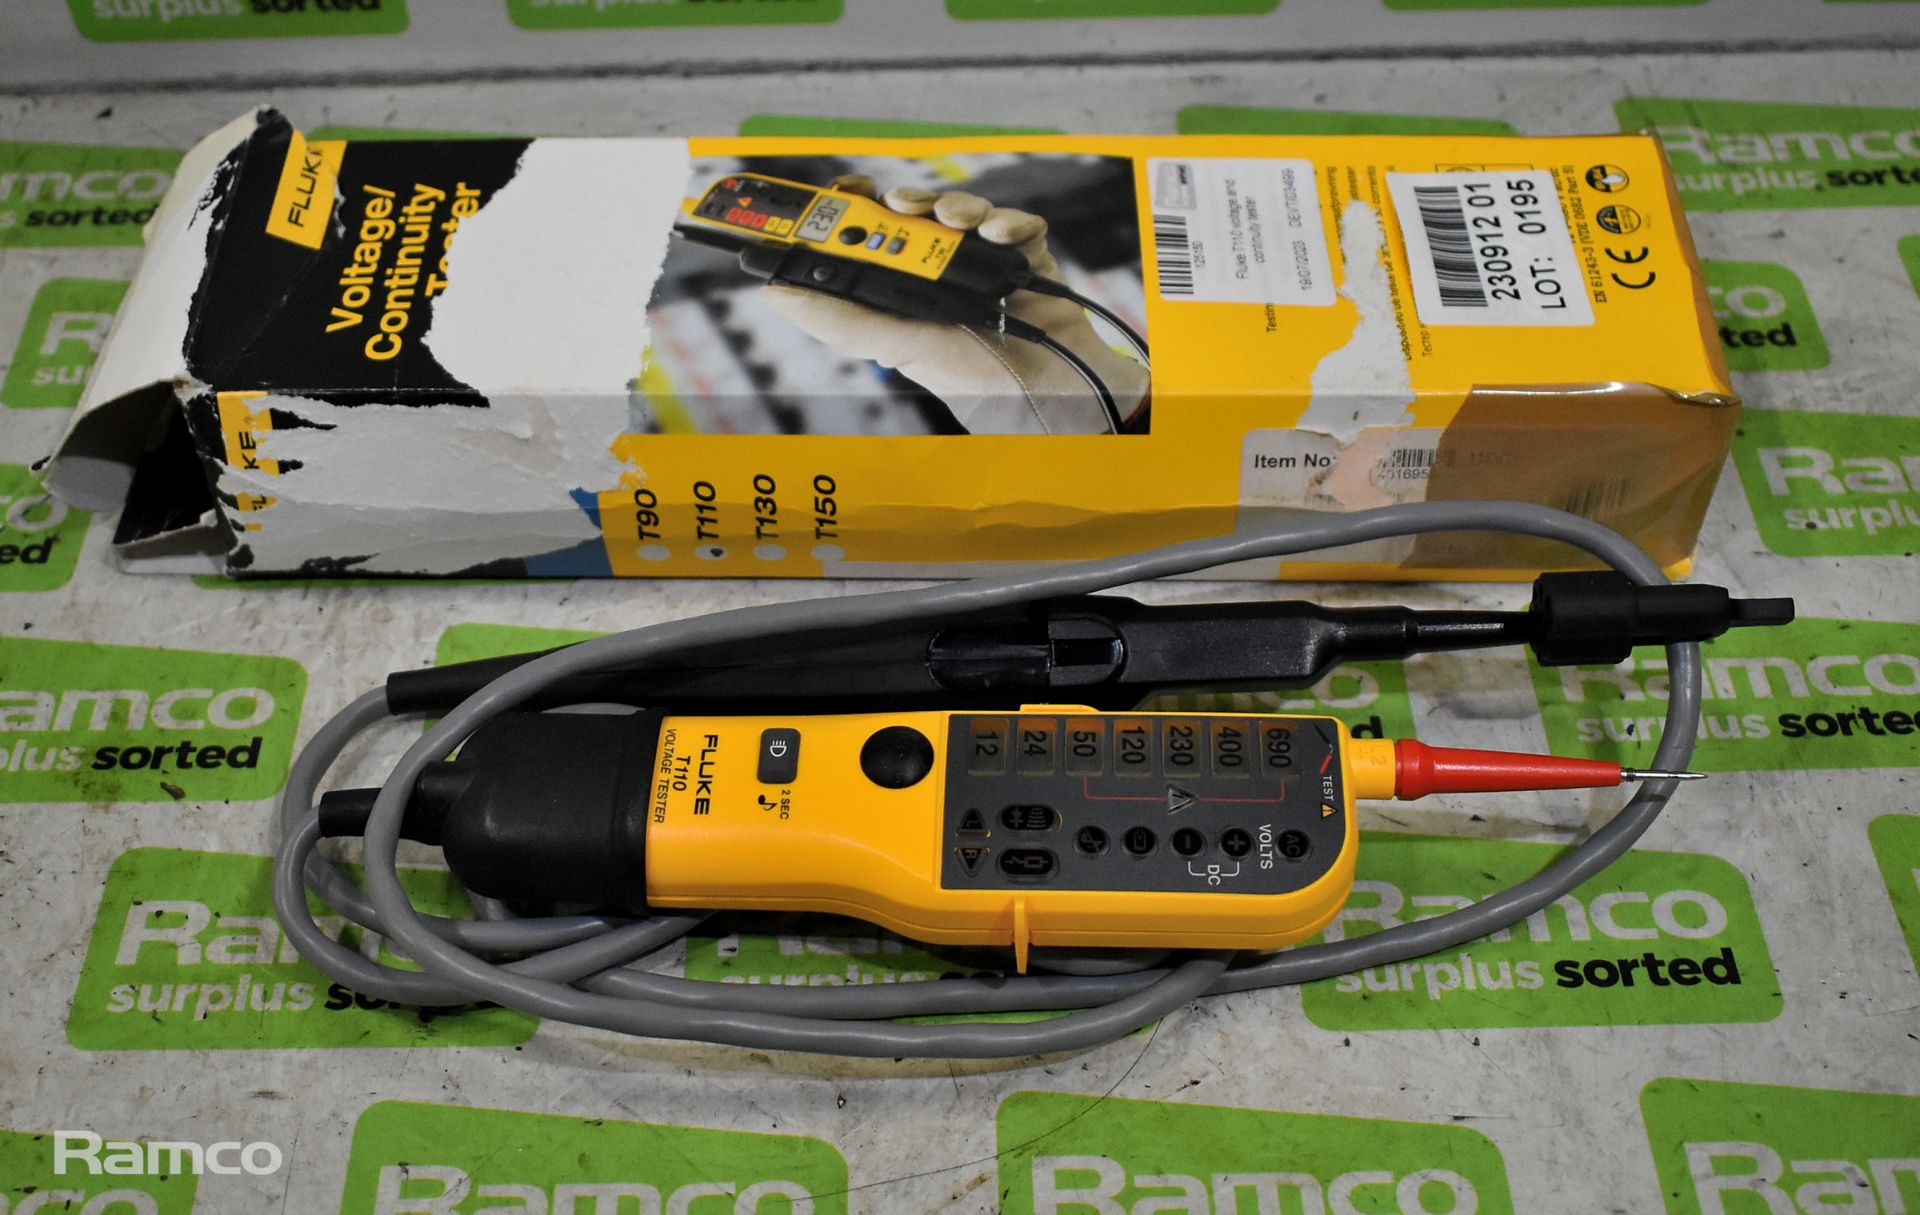 Fluke T110 voltage and continuity tester